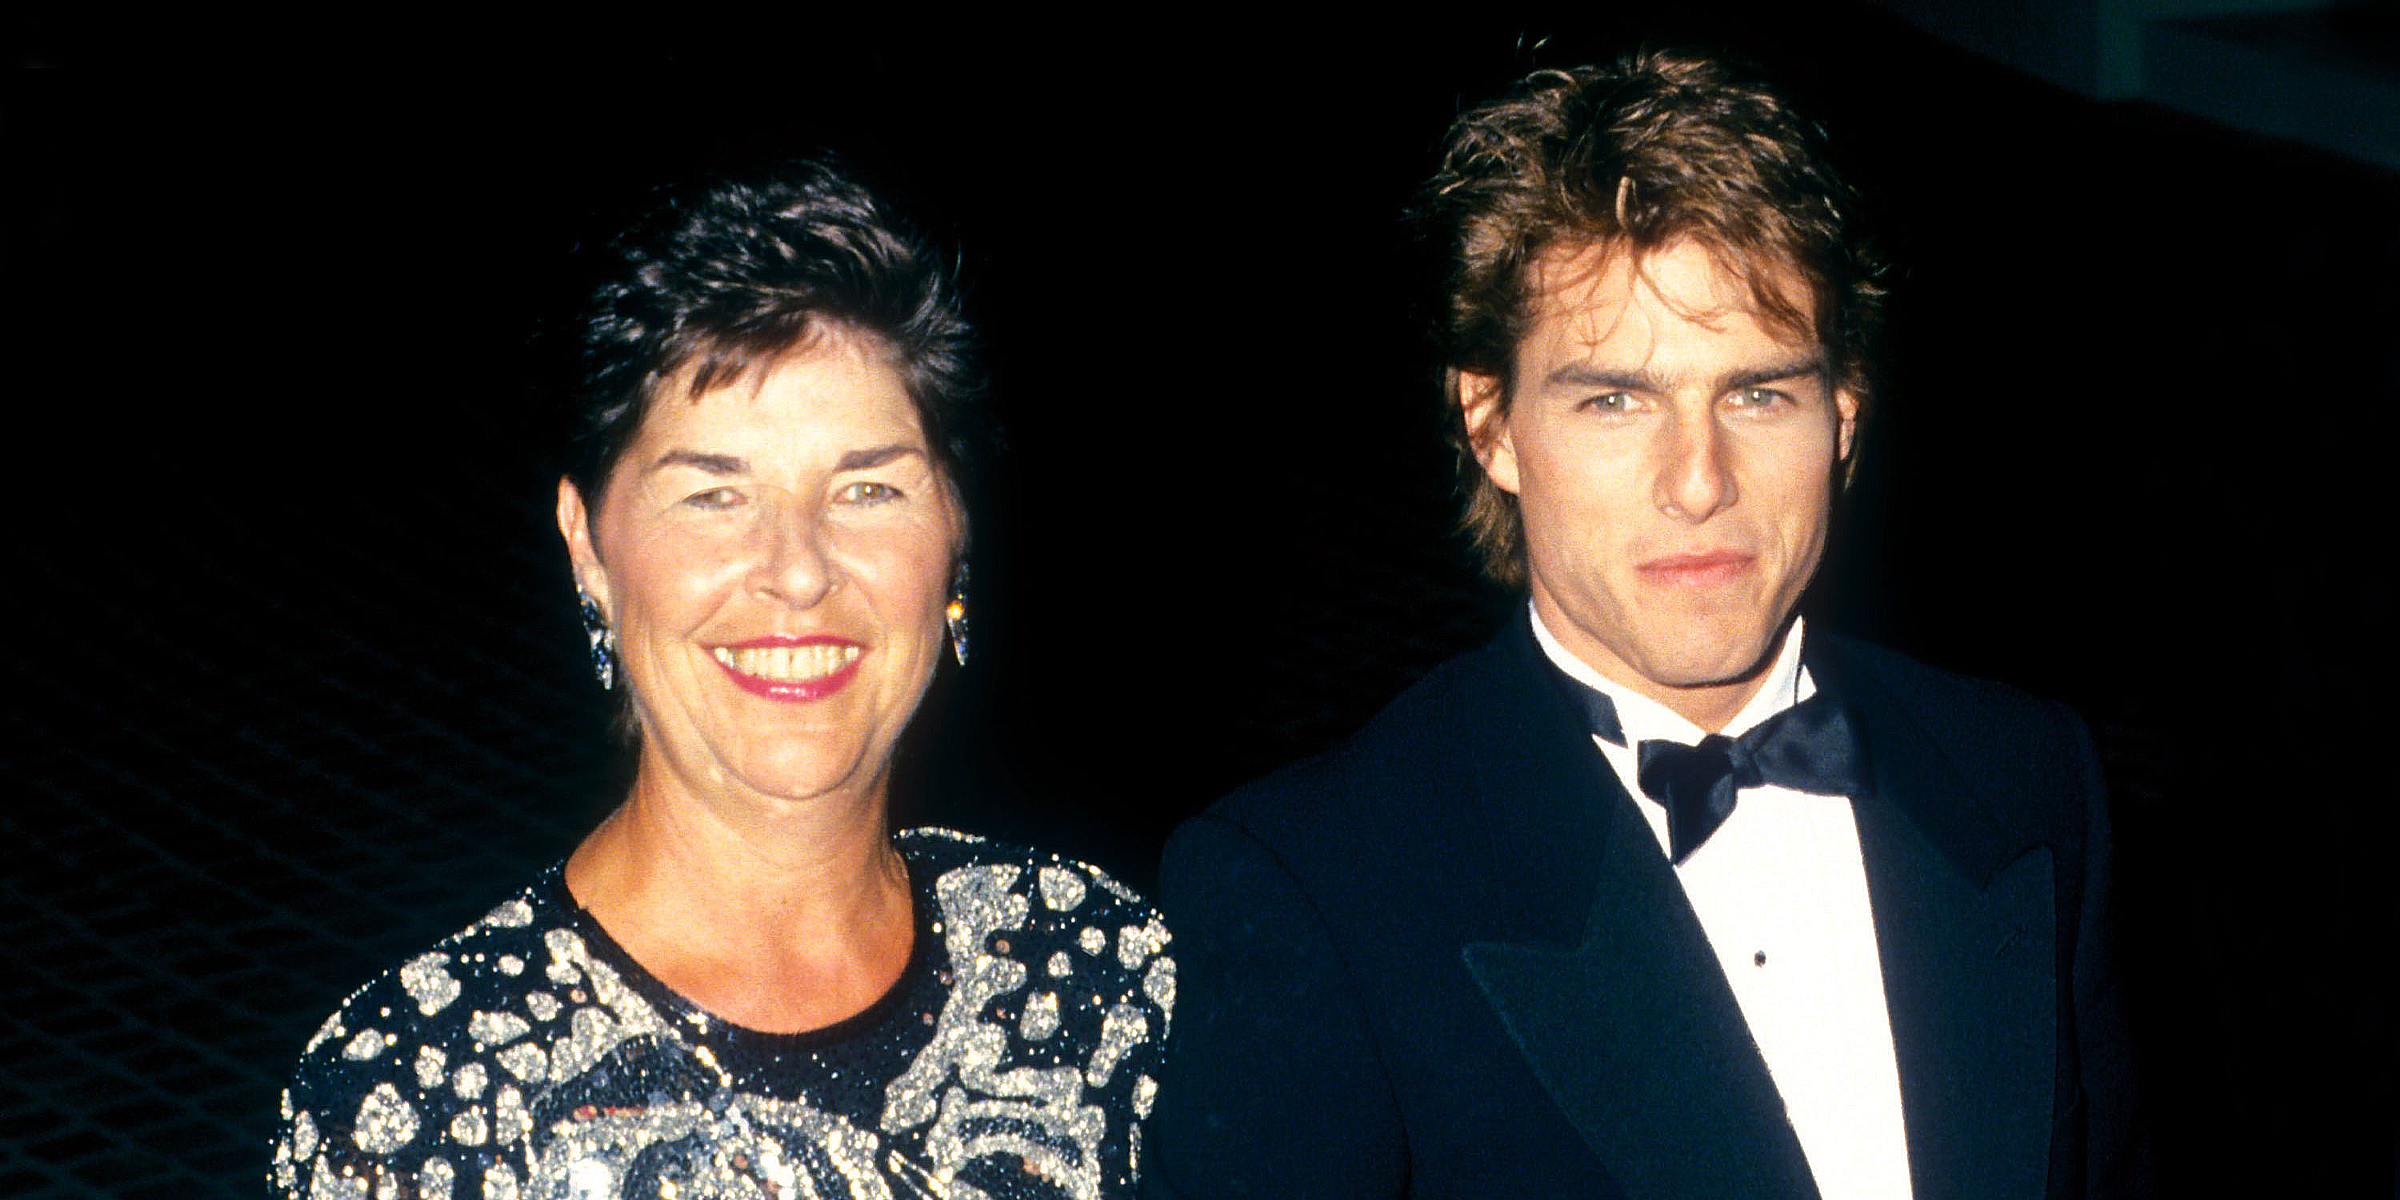 Mary Lee Pfeiffer et Tom Cruise | Source : Getty Images